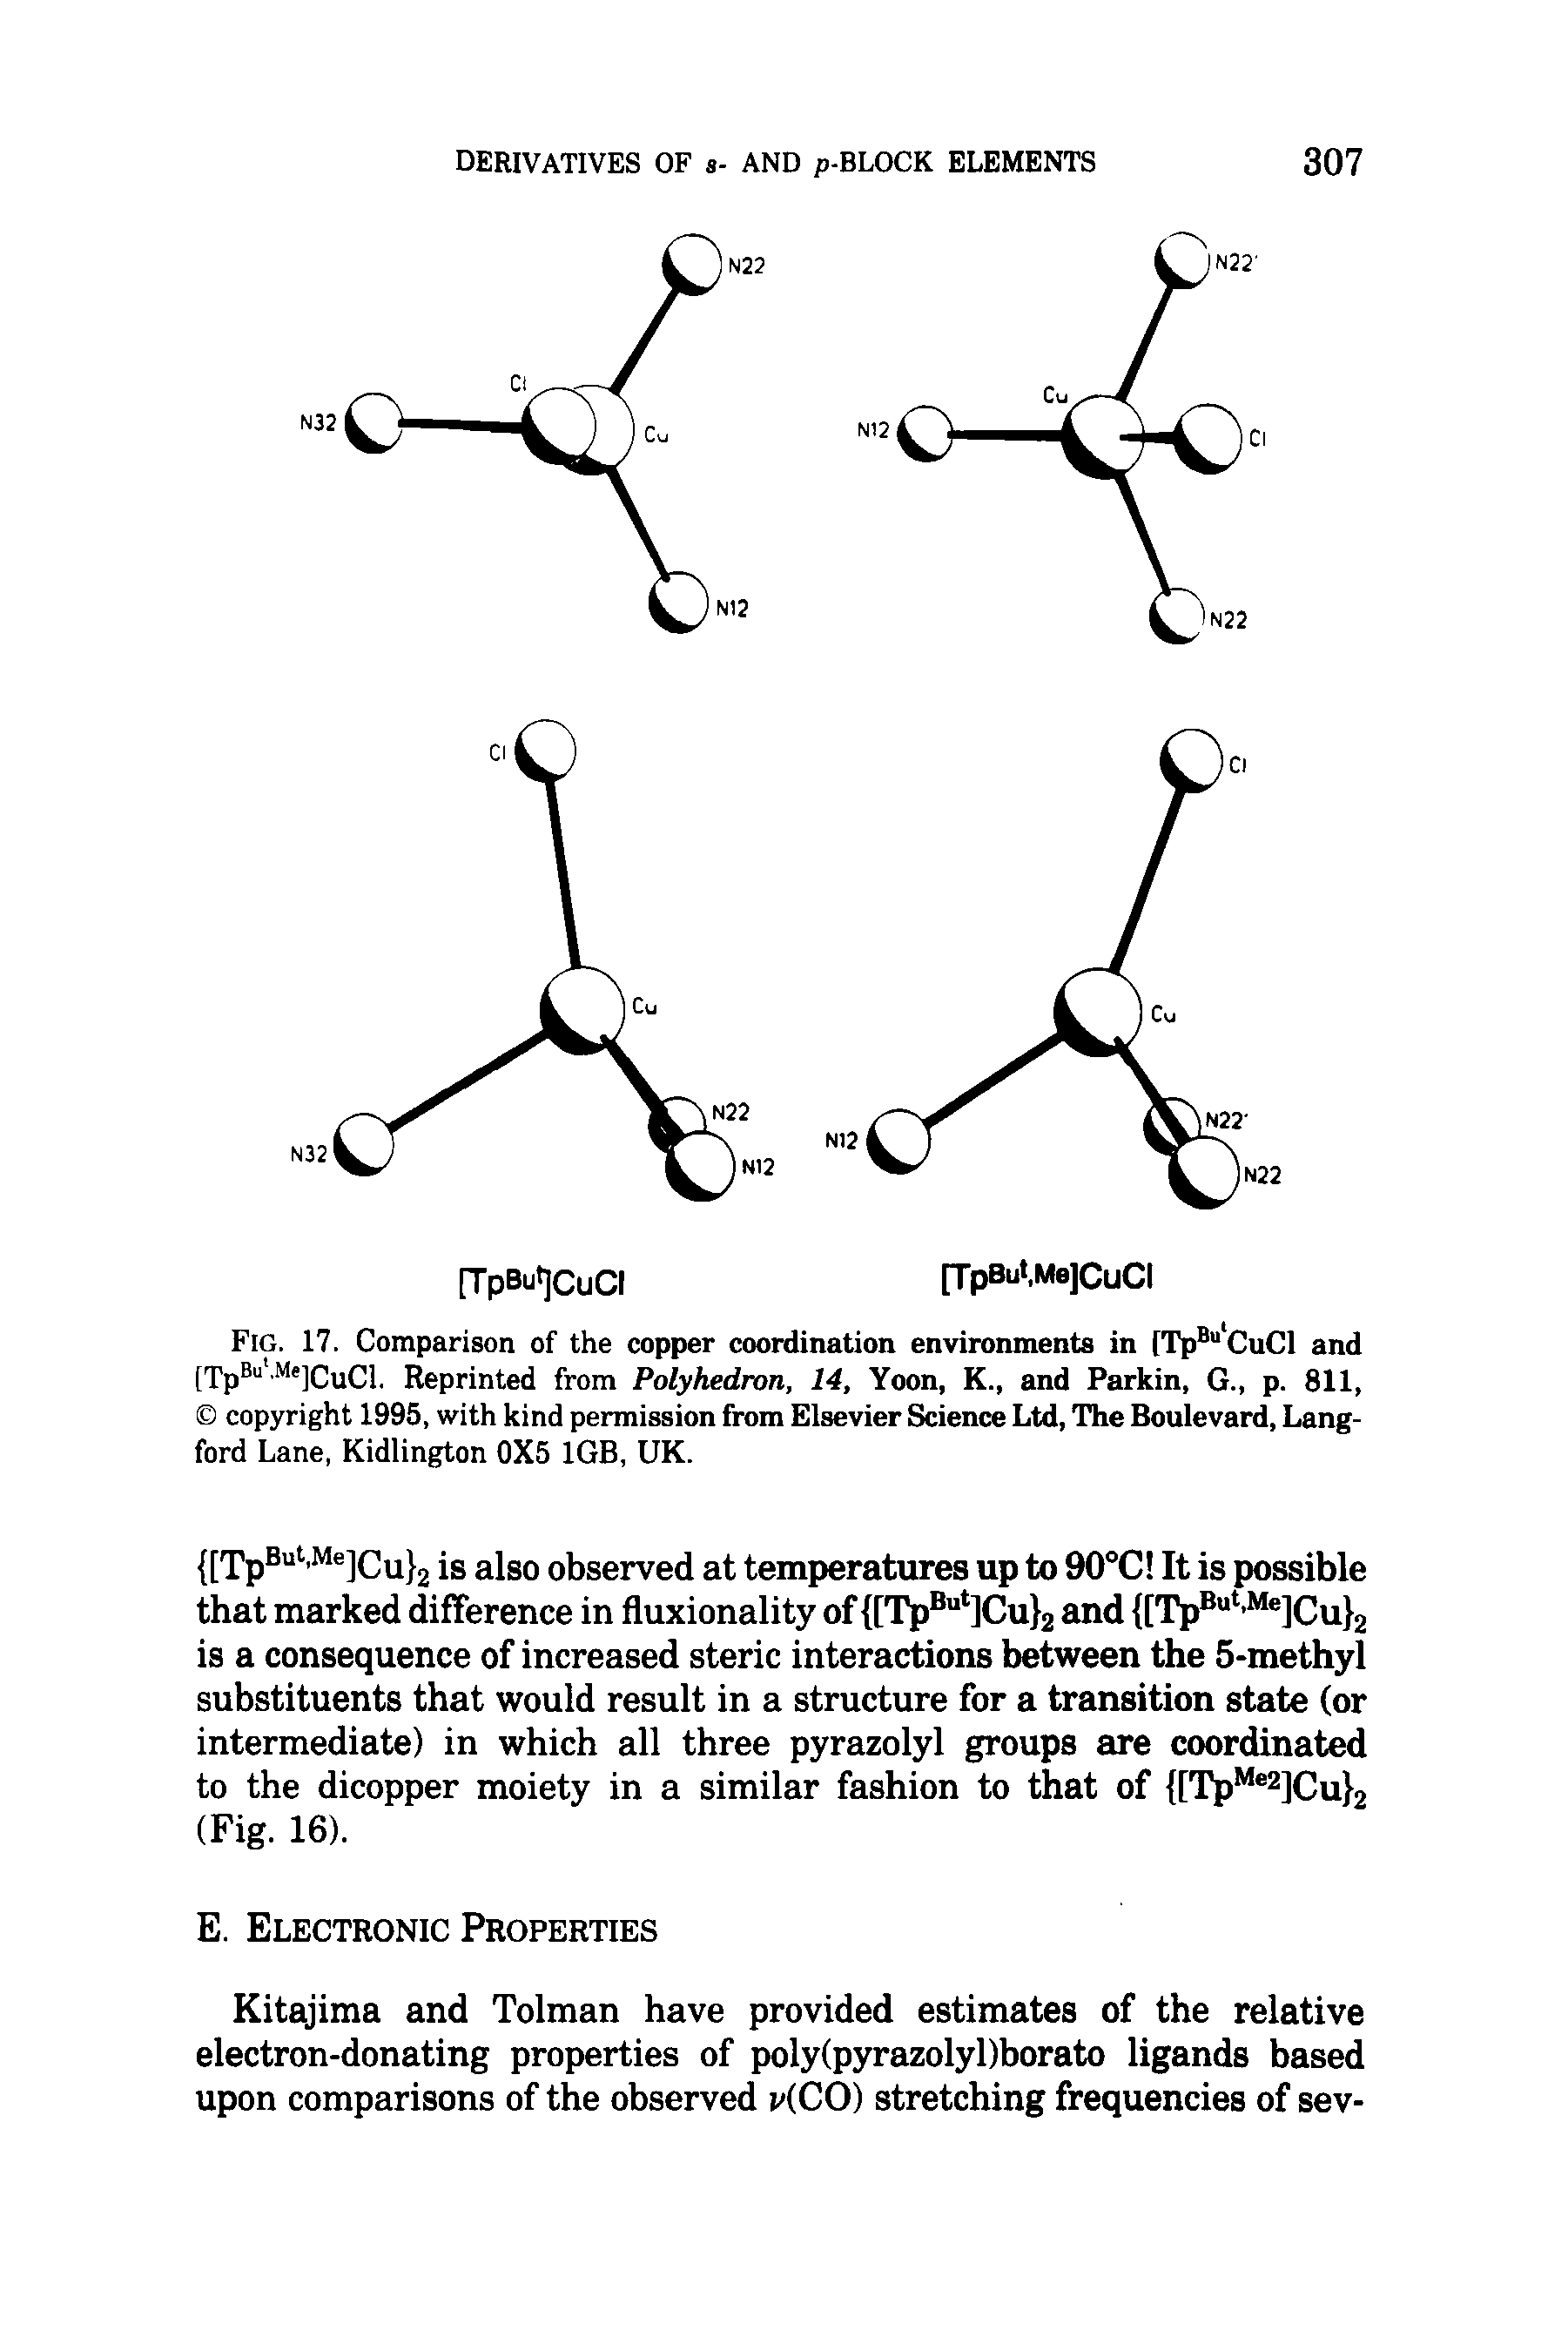 Fig. 17. Comparison of the copper coordination environments in [TpB"lCuCl and [TpBu Me]CUCl. Reprinted from Polyhedron, 14, Yoon, K., and Parkin, G., p. 811, copyright 1995, with kind permission from Elsevier Science Ltd, The Boulevard, Langford Lane, Kidlington 0X5 1GB, UK.